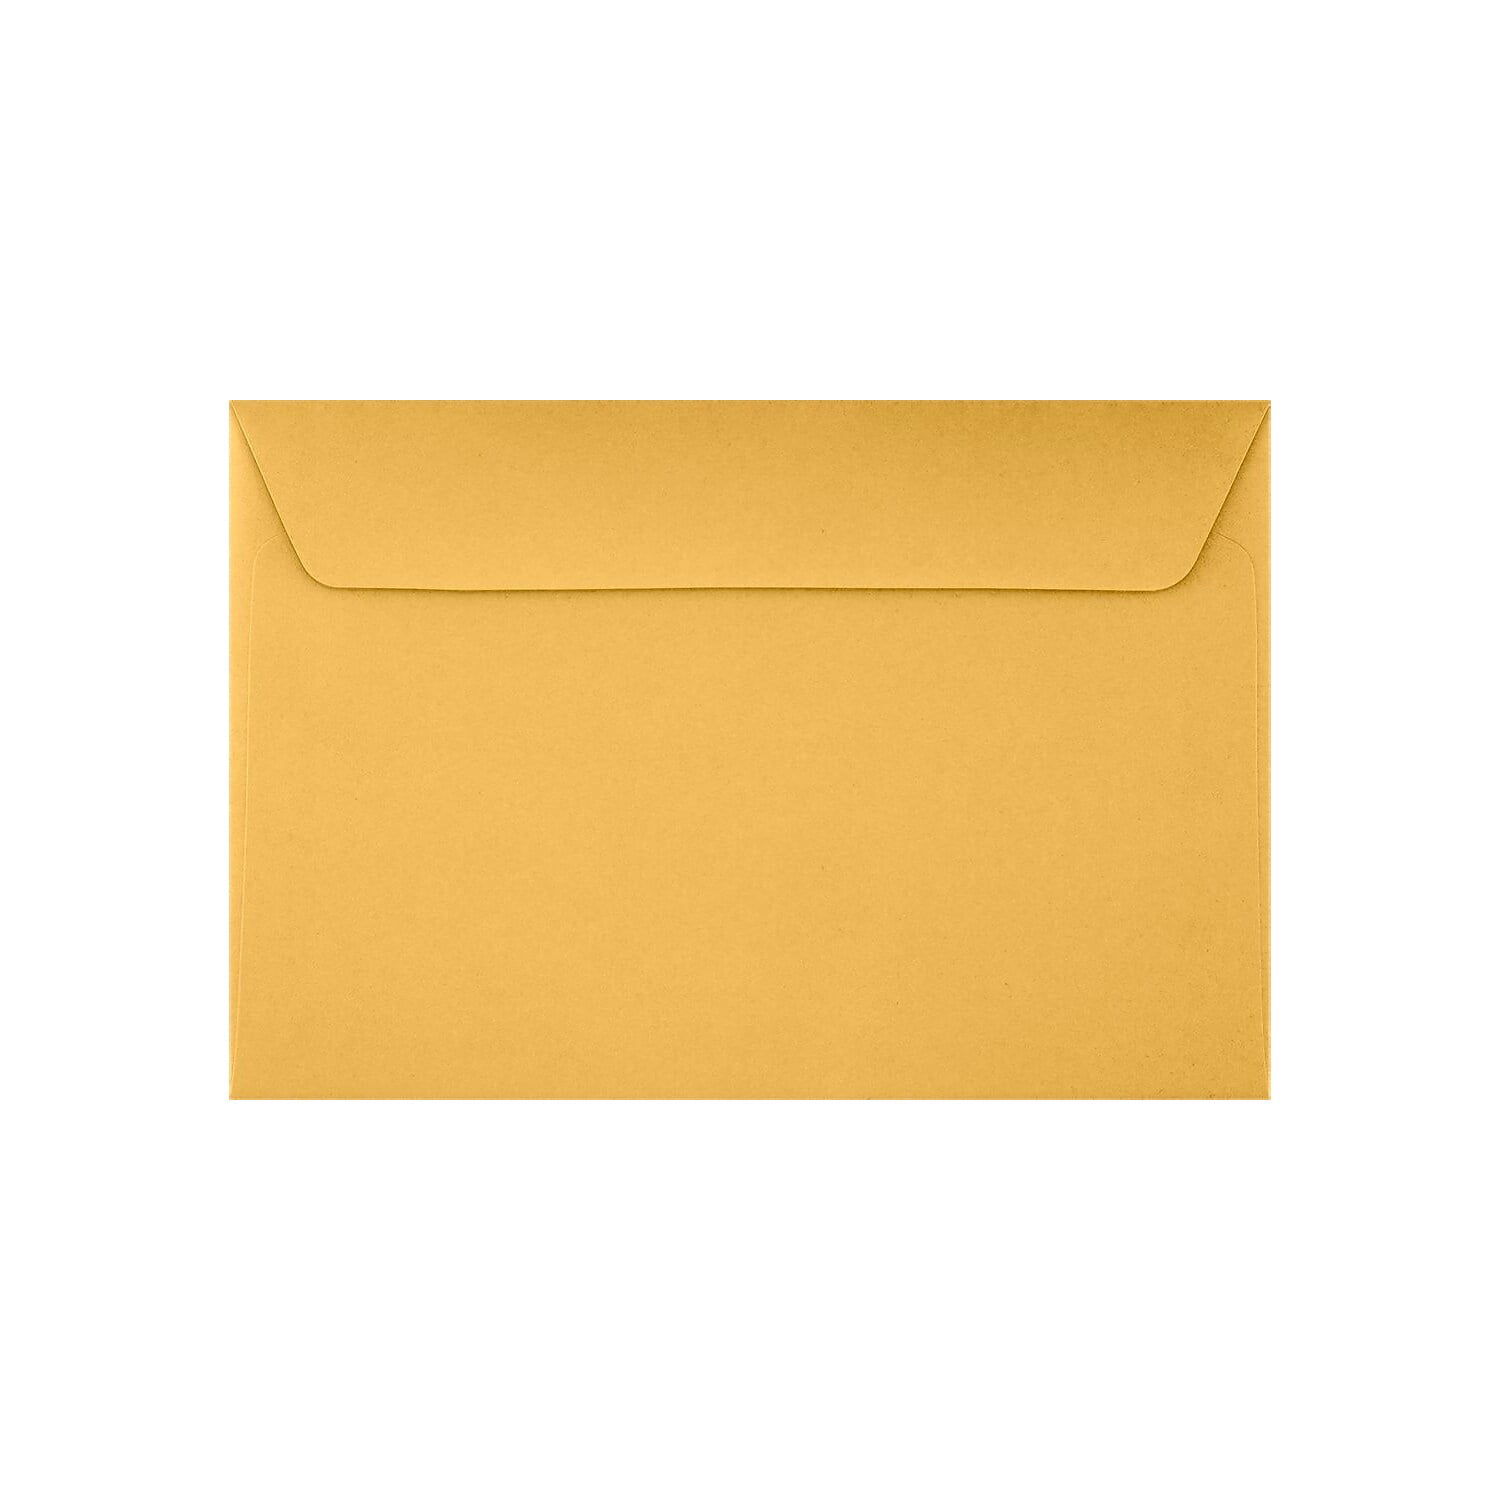 | Perfect for Catalogs Invitations 9 x 12 Booklet Envelopes Magazines Brochures 50 Qty. Annual Reports LUX-4899-112-50 Tangerine Orange 